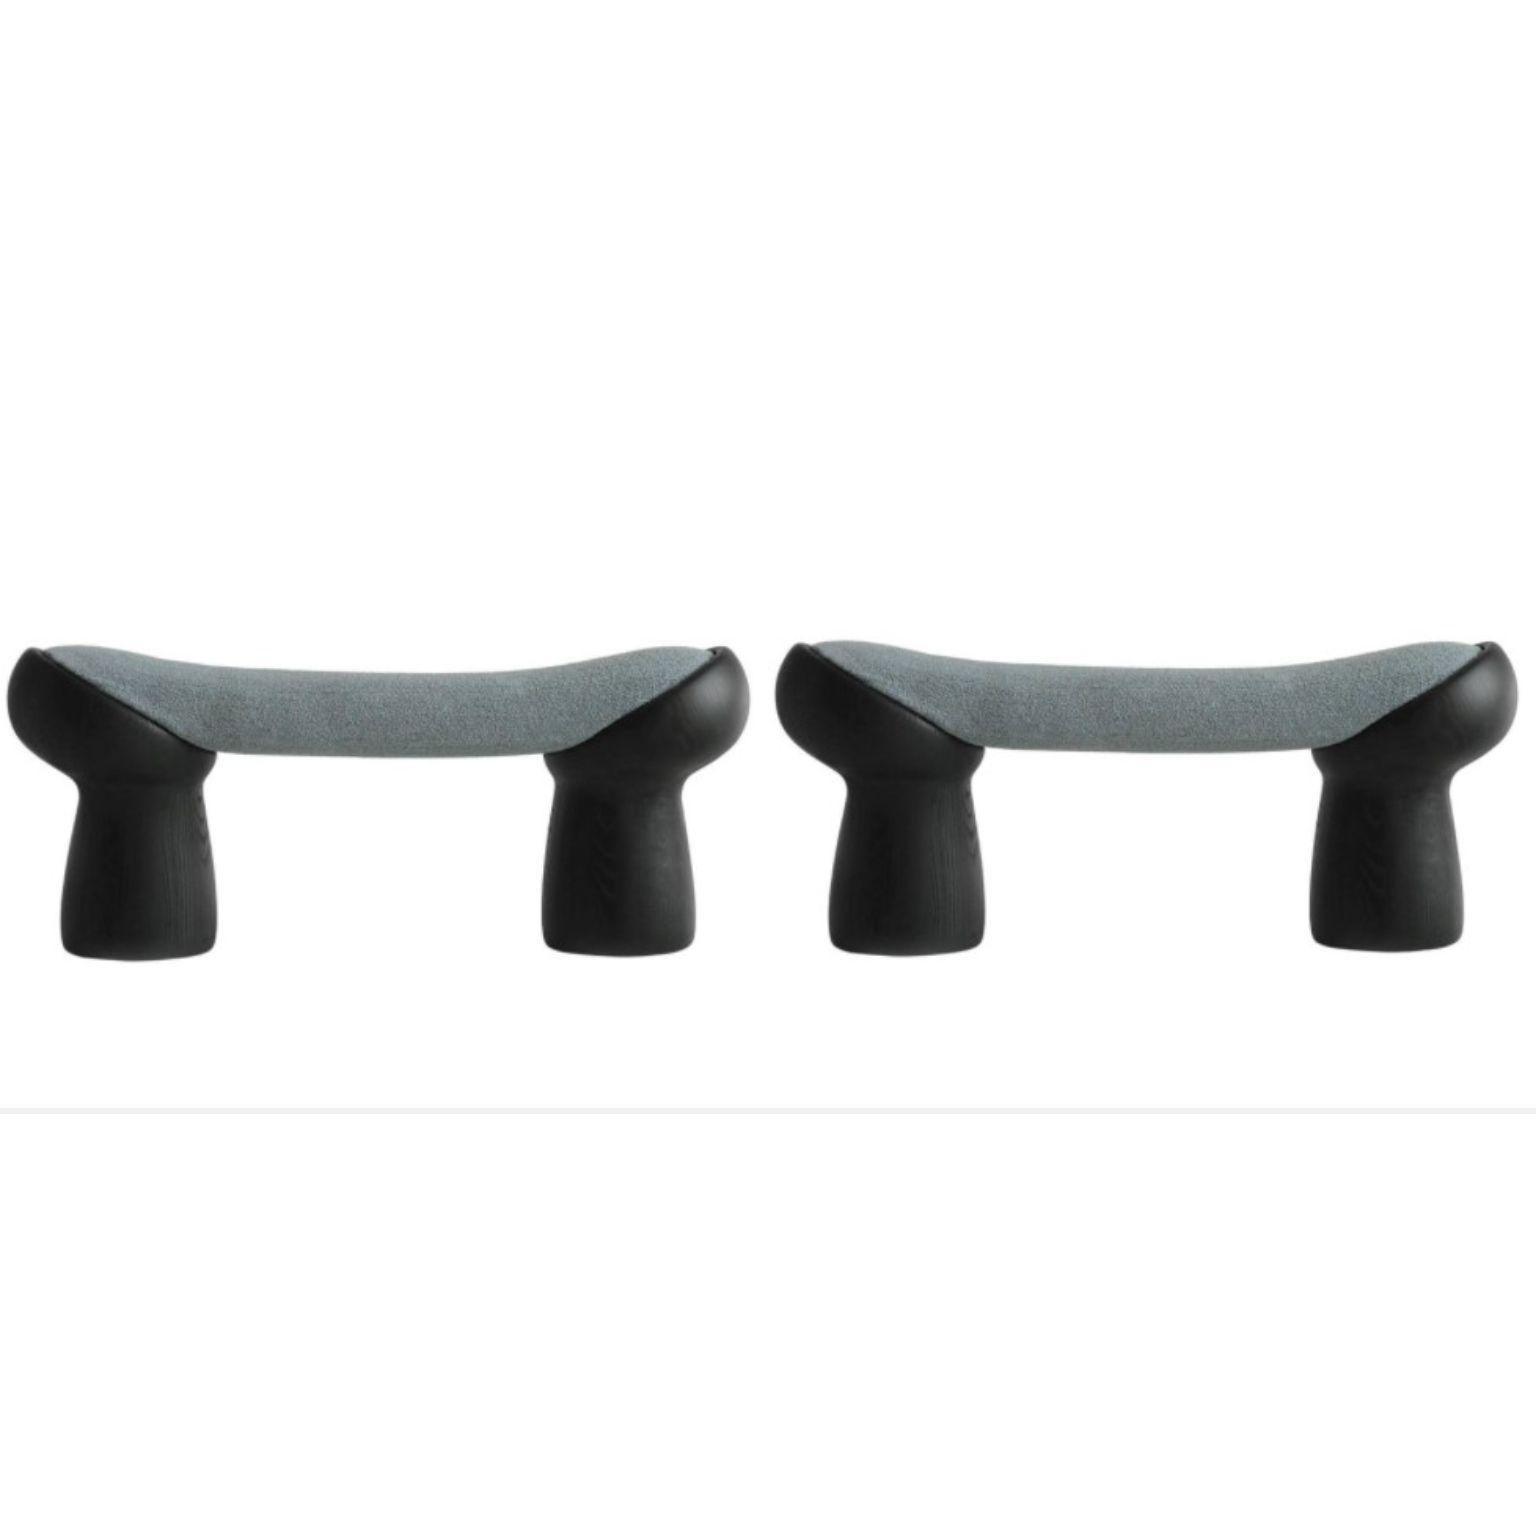 Set of 2 contemporary benches by Faina
Design: Victoriya Yakusha
Material: textile, wood, foam, rubber, sintepon
Dimensions: H 49 x W 124 x L 33 cm

In search of new-old design messages, Victoria Yakusha conducted a study of the daily